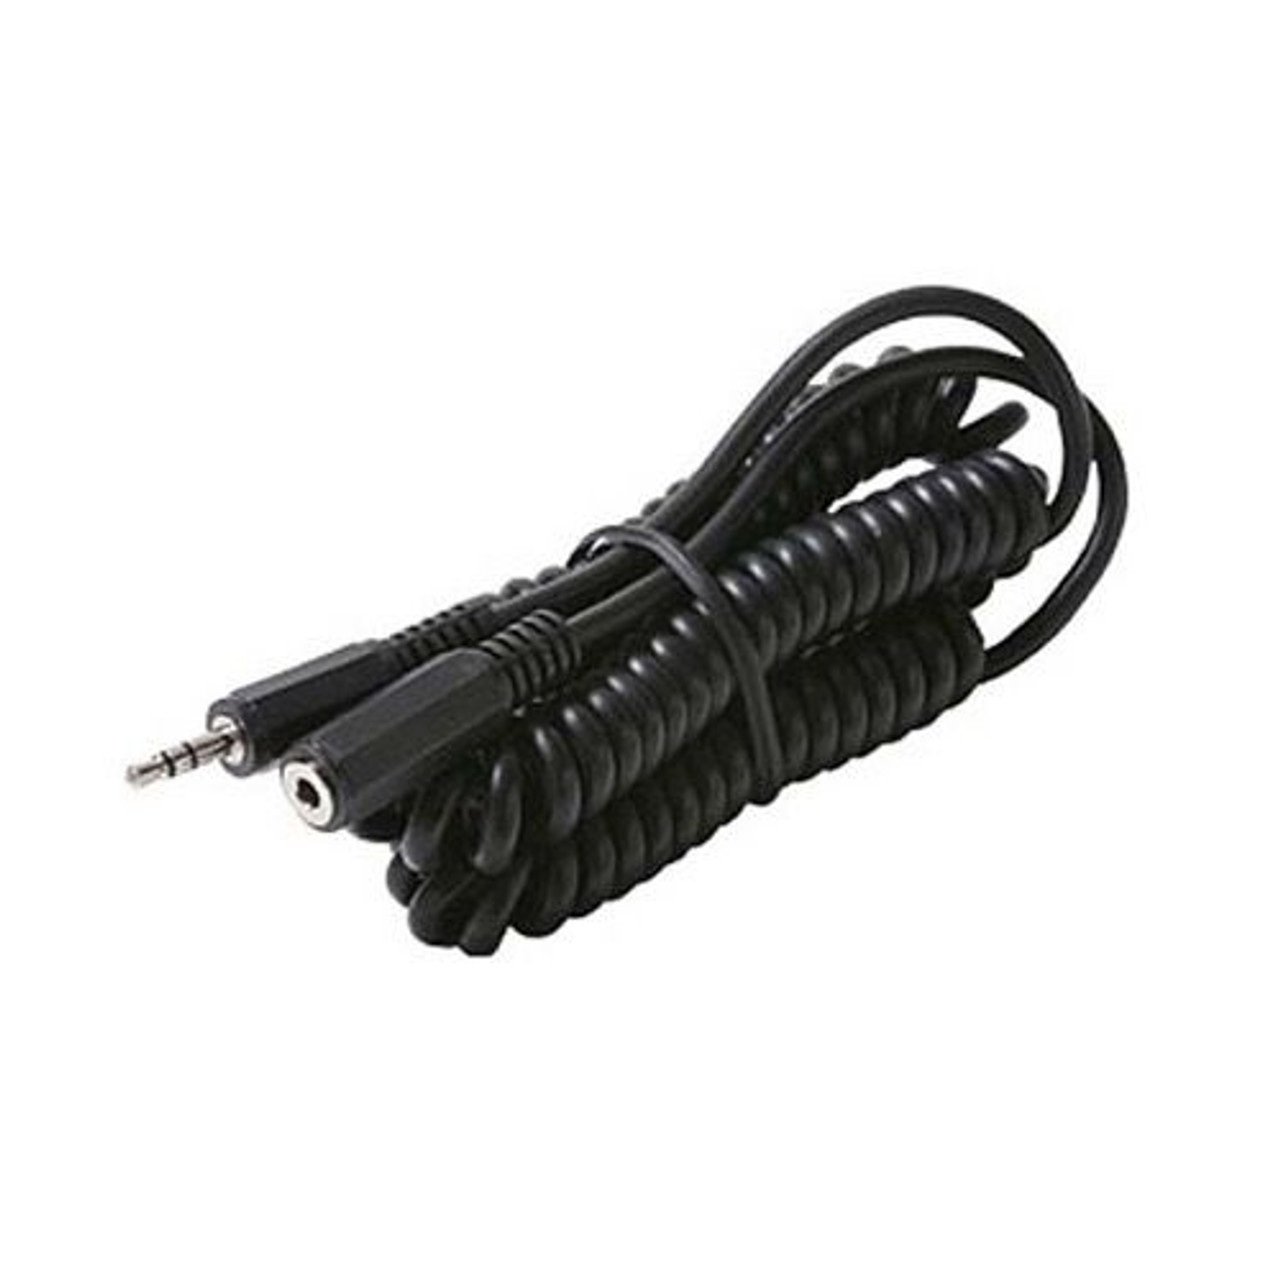 Steren 255-185 10' FT Coiled 3.5mm Stereo Headphone Extension Cable Male Stereo Plug to Female Stereo Jack Audio Adapter Extension